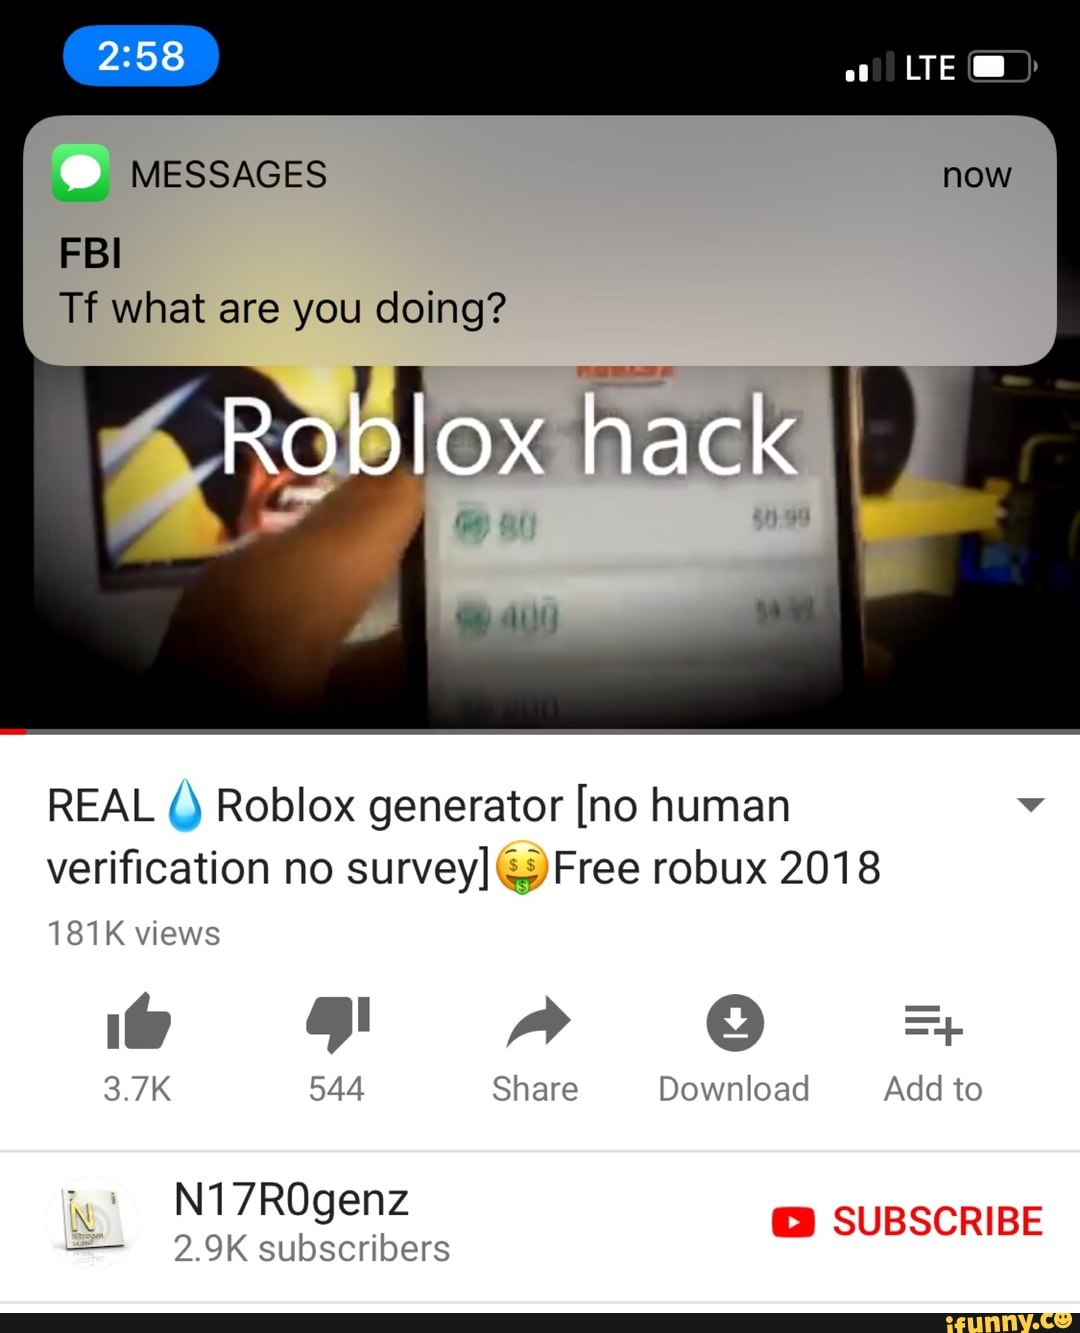 How To Get Free Robux 2018 Without Human Verification